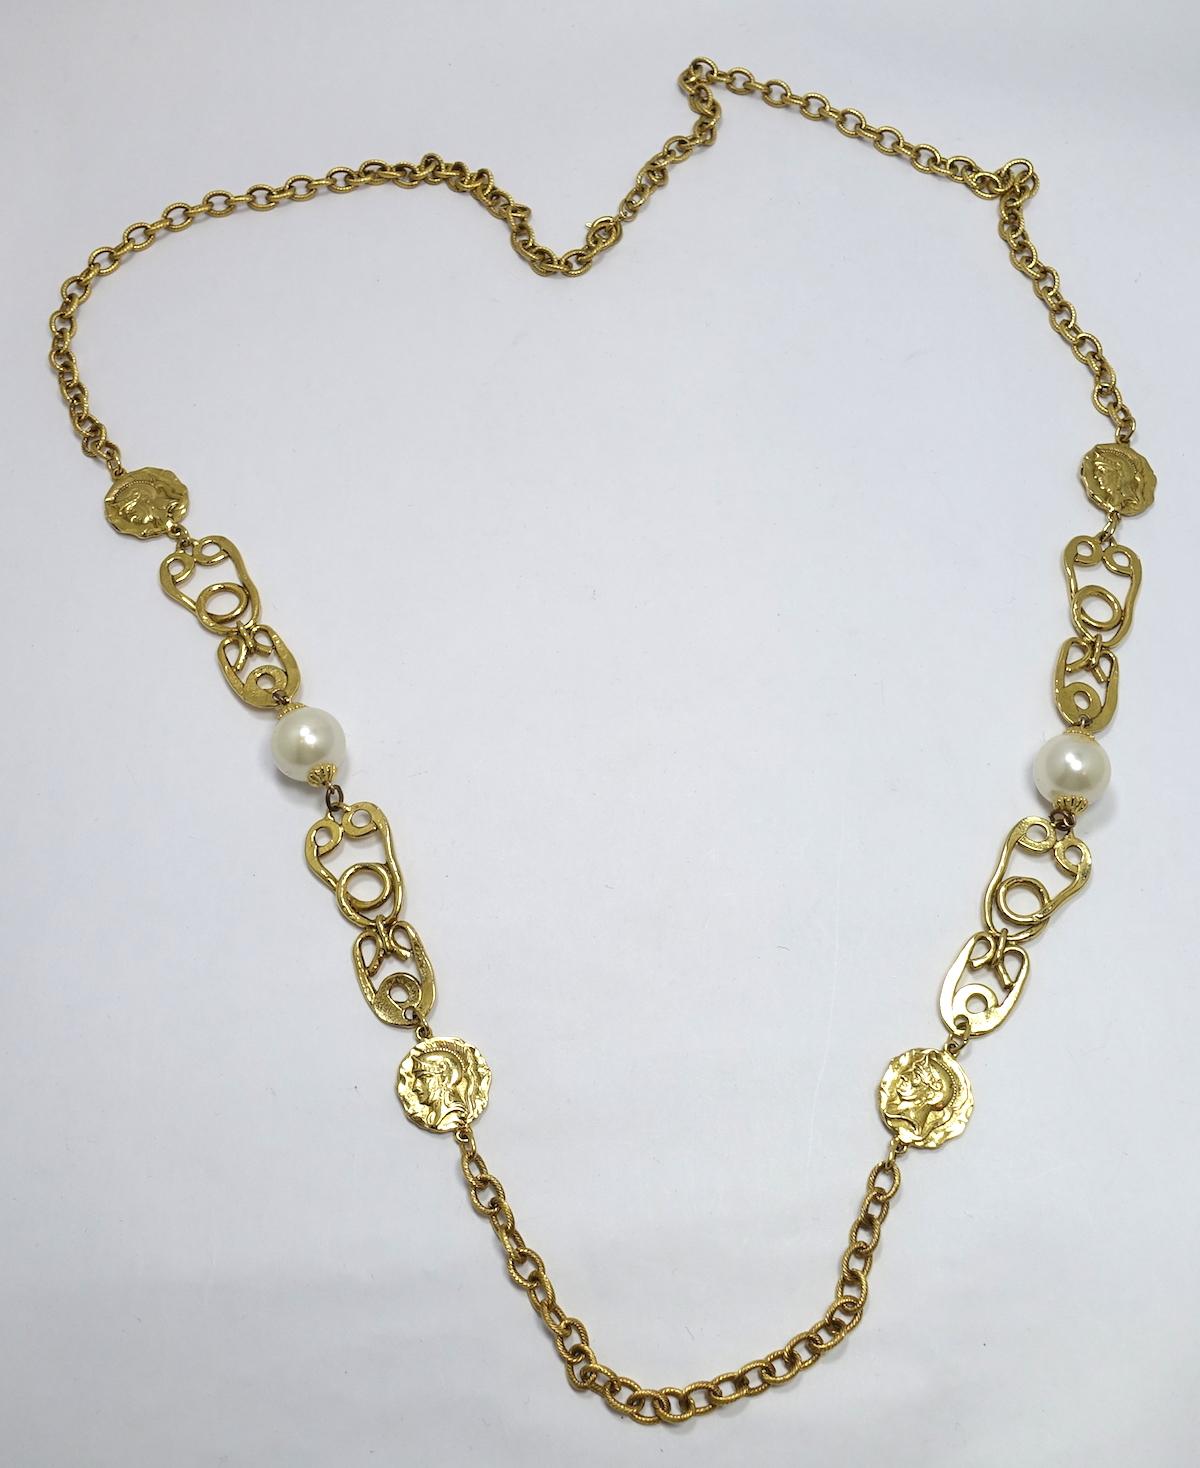 This necklace features discs with a figure of a Roman soldier accented by faux pearls in a gold-tone setting.  This piece measures 44” x ¾” with a spring closure and is in excellent condition.